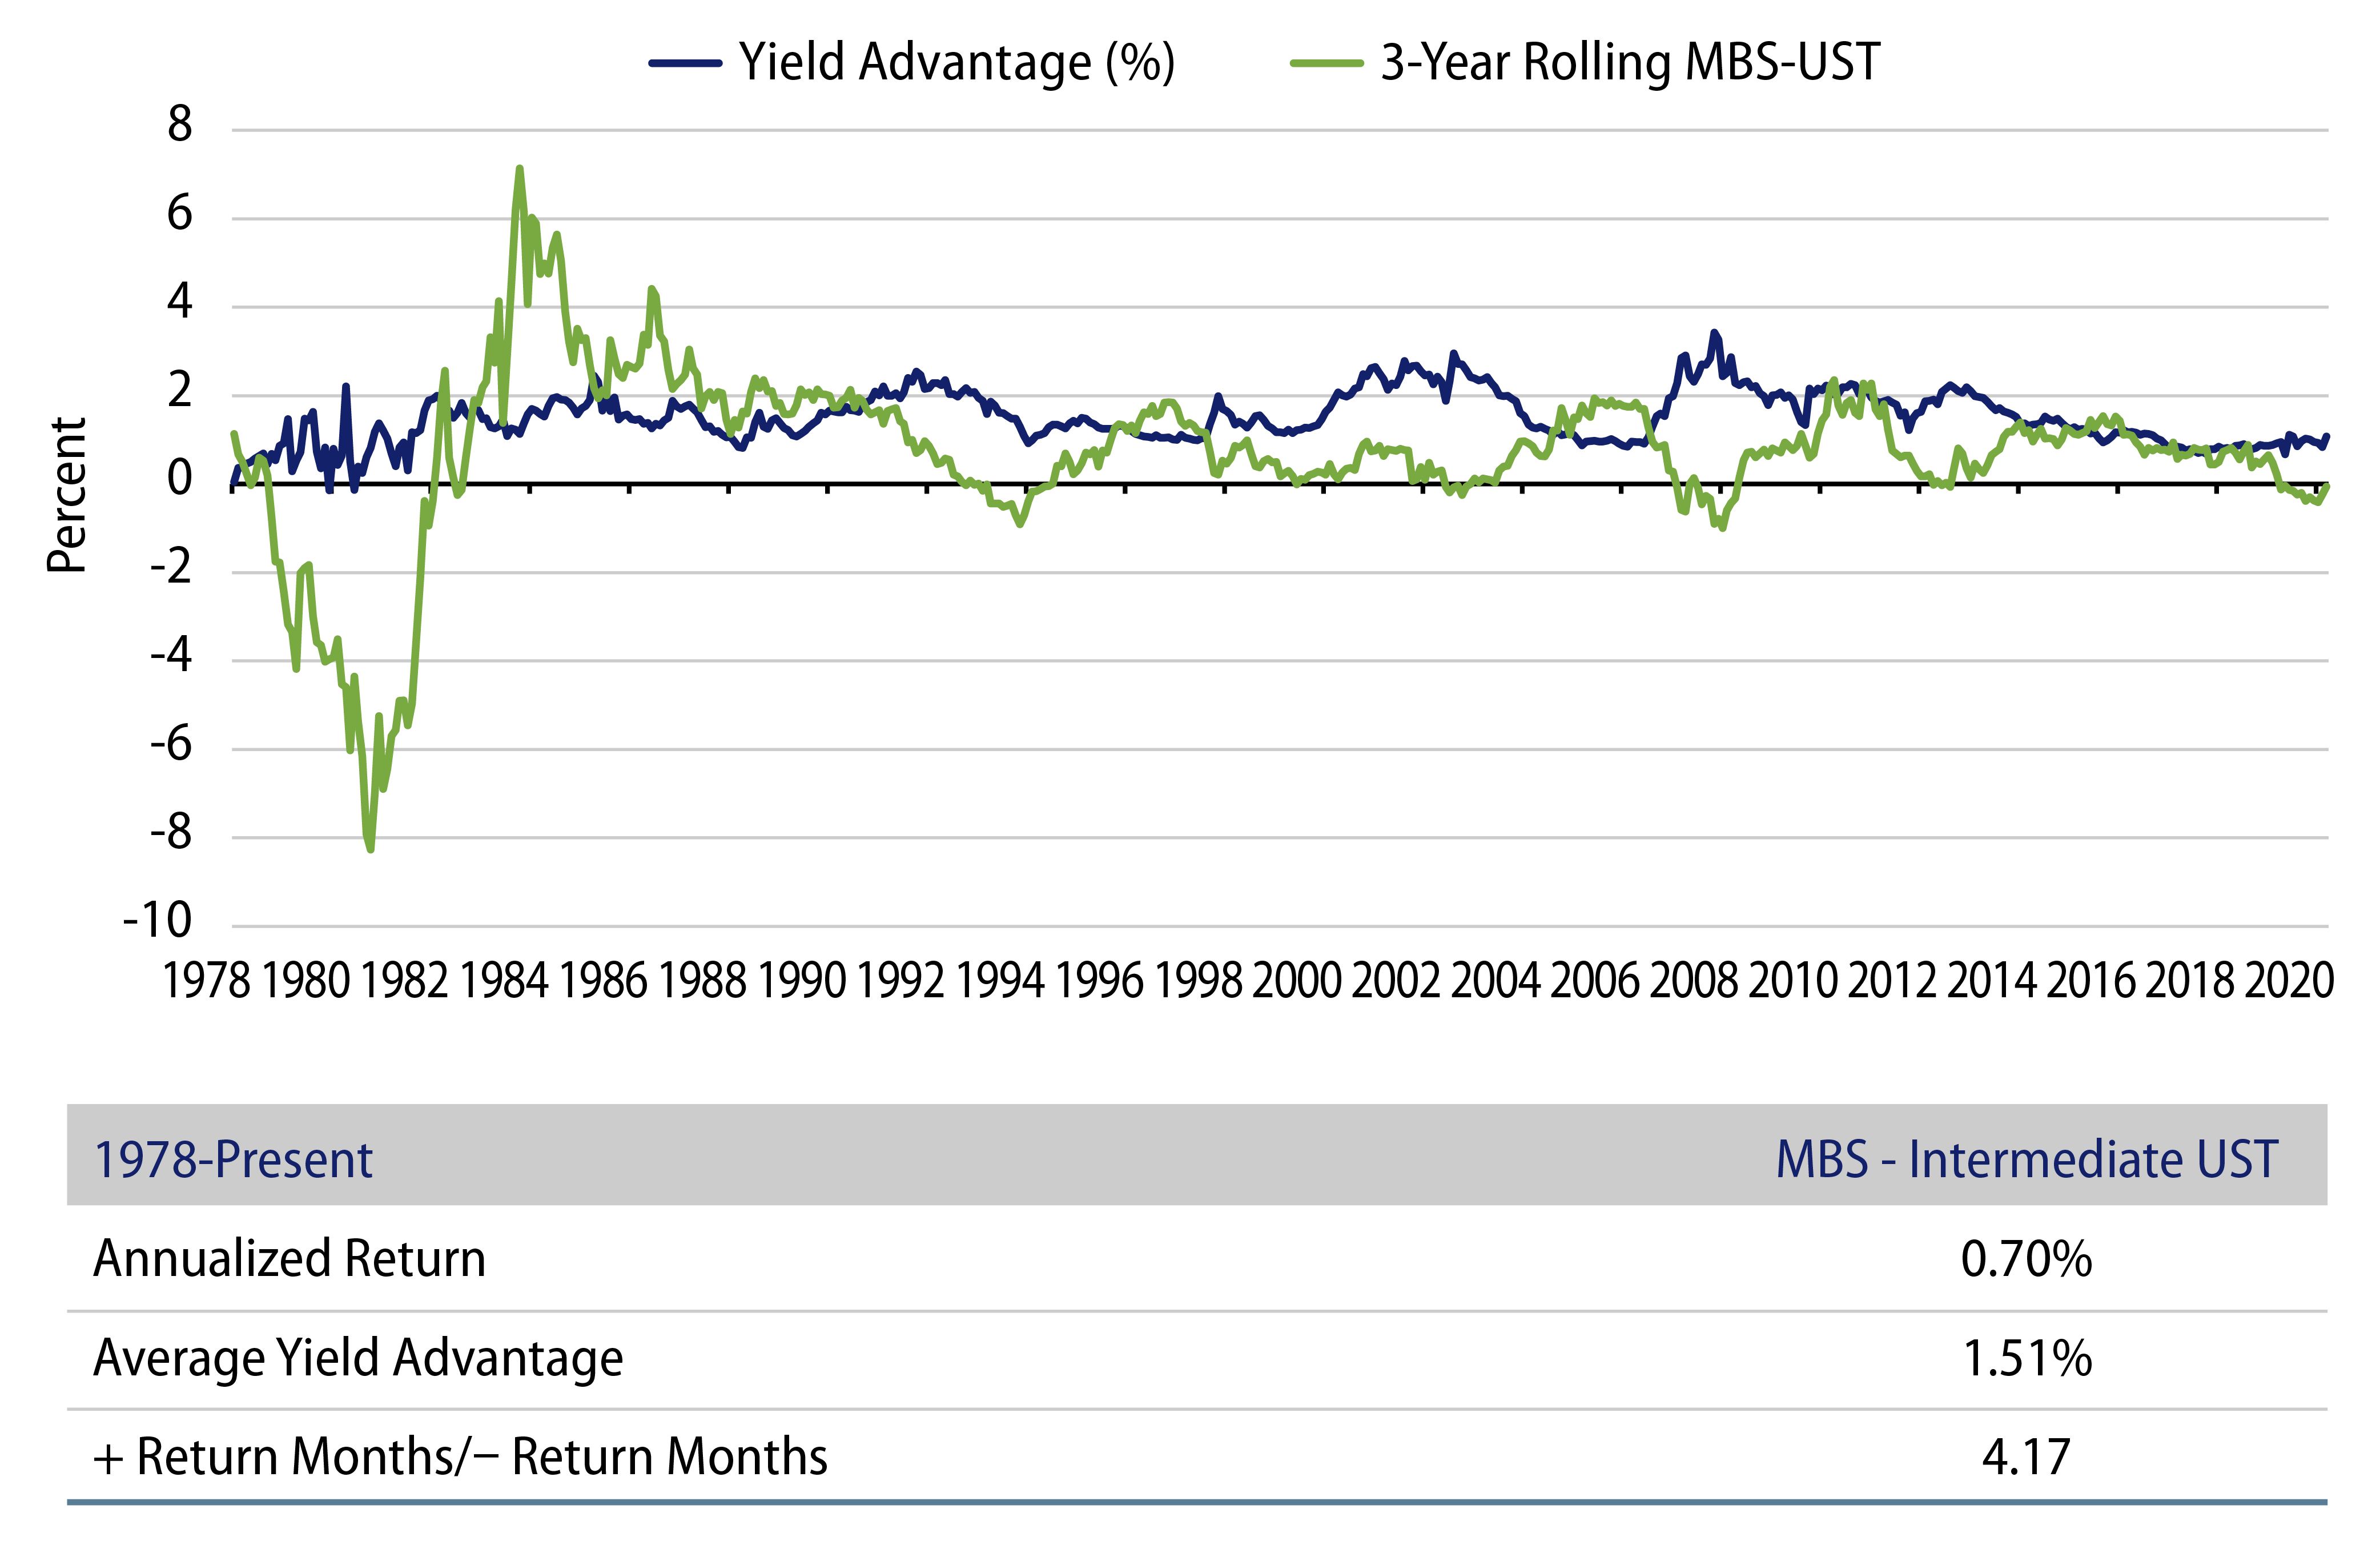 Explore Agency MBS Historical Yield Advantage and Rolling Return Differential     .